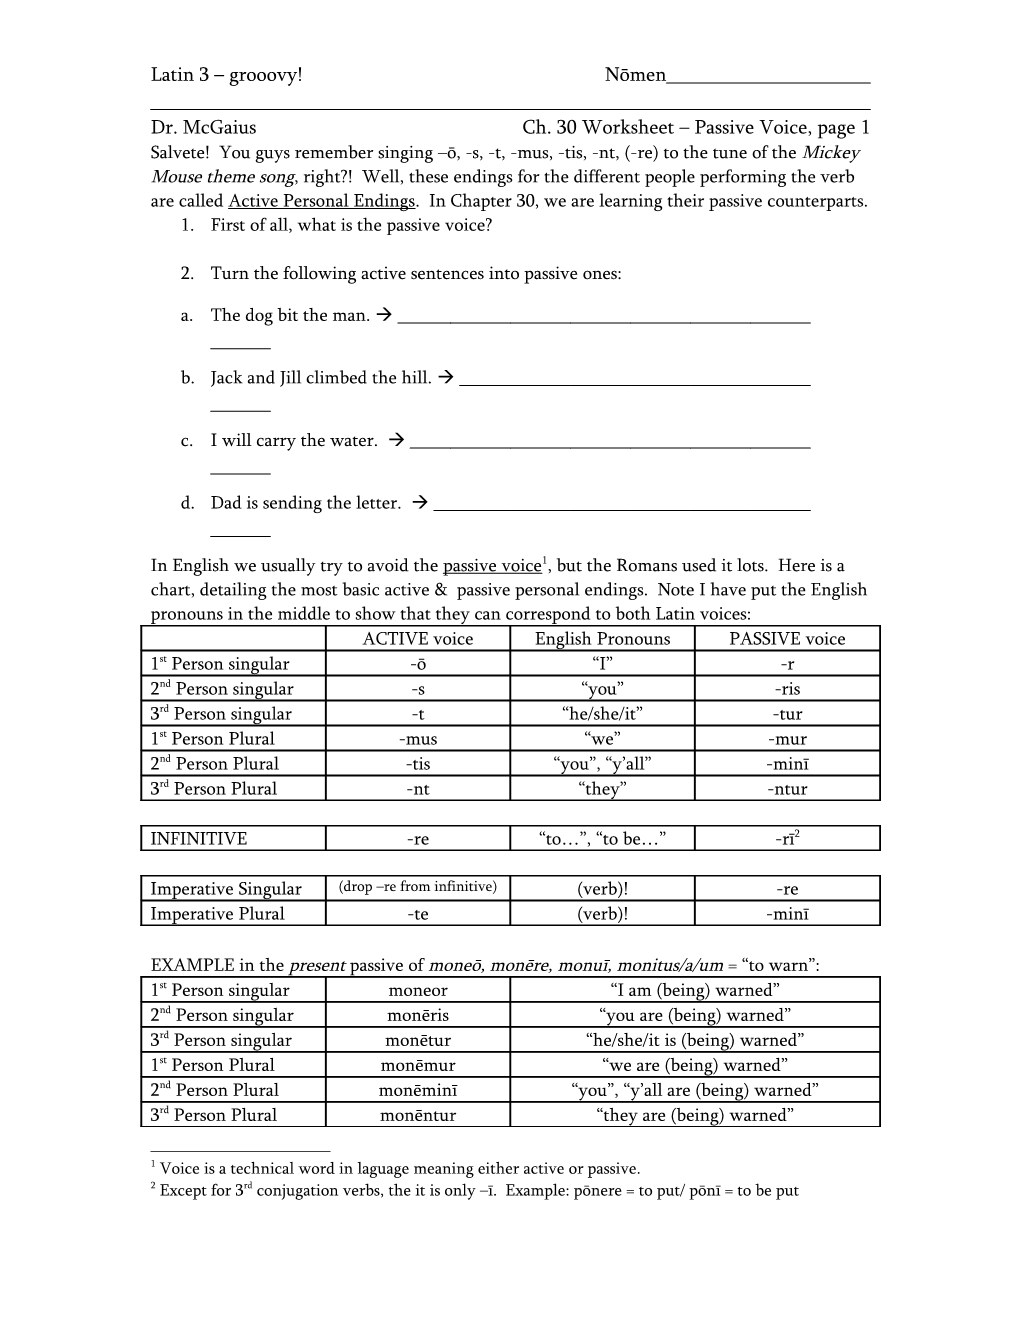 Dr. Mcgaiusch. 30 Worksheet Passive Voice, Page 1